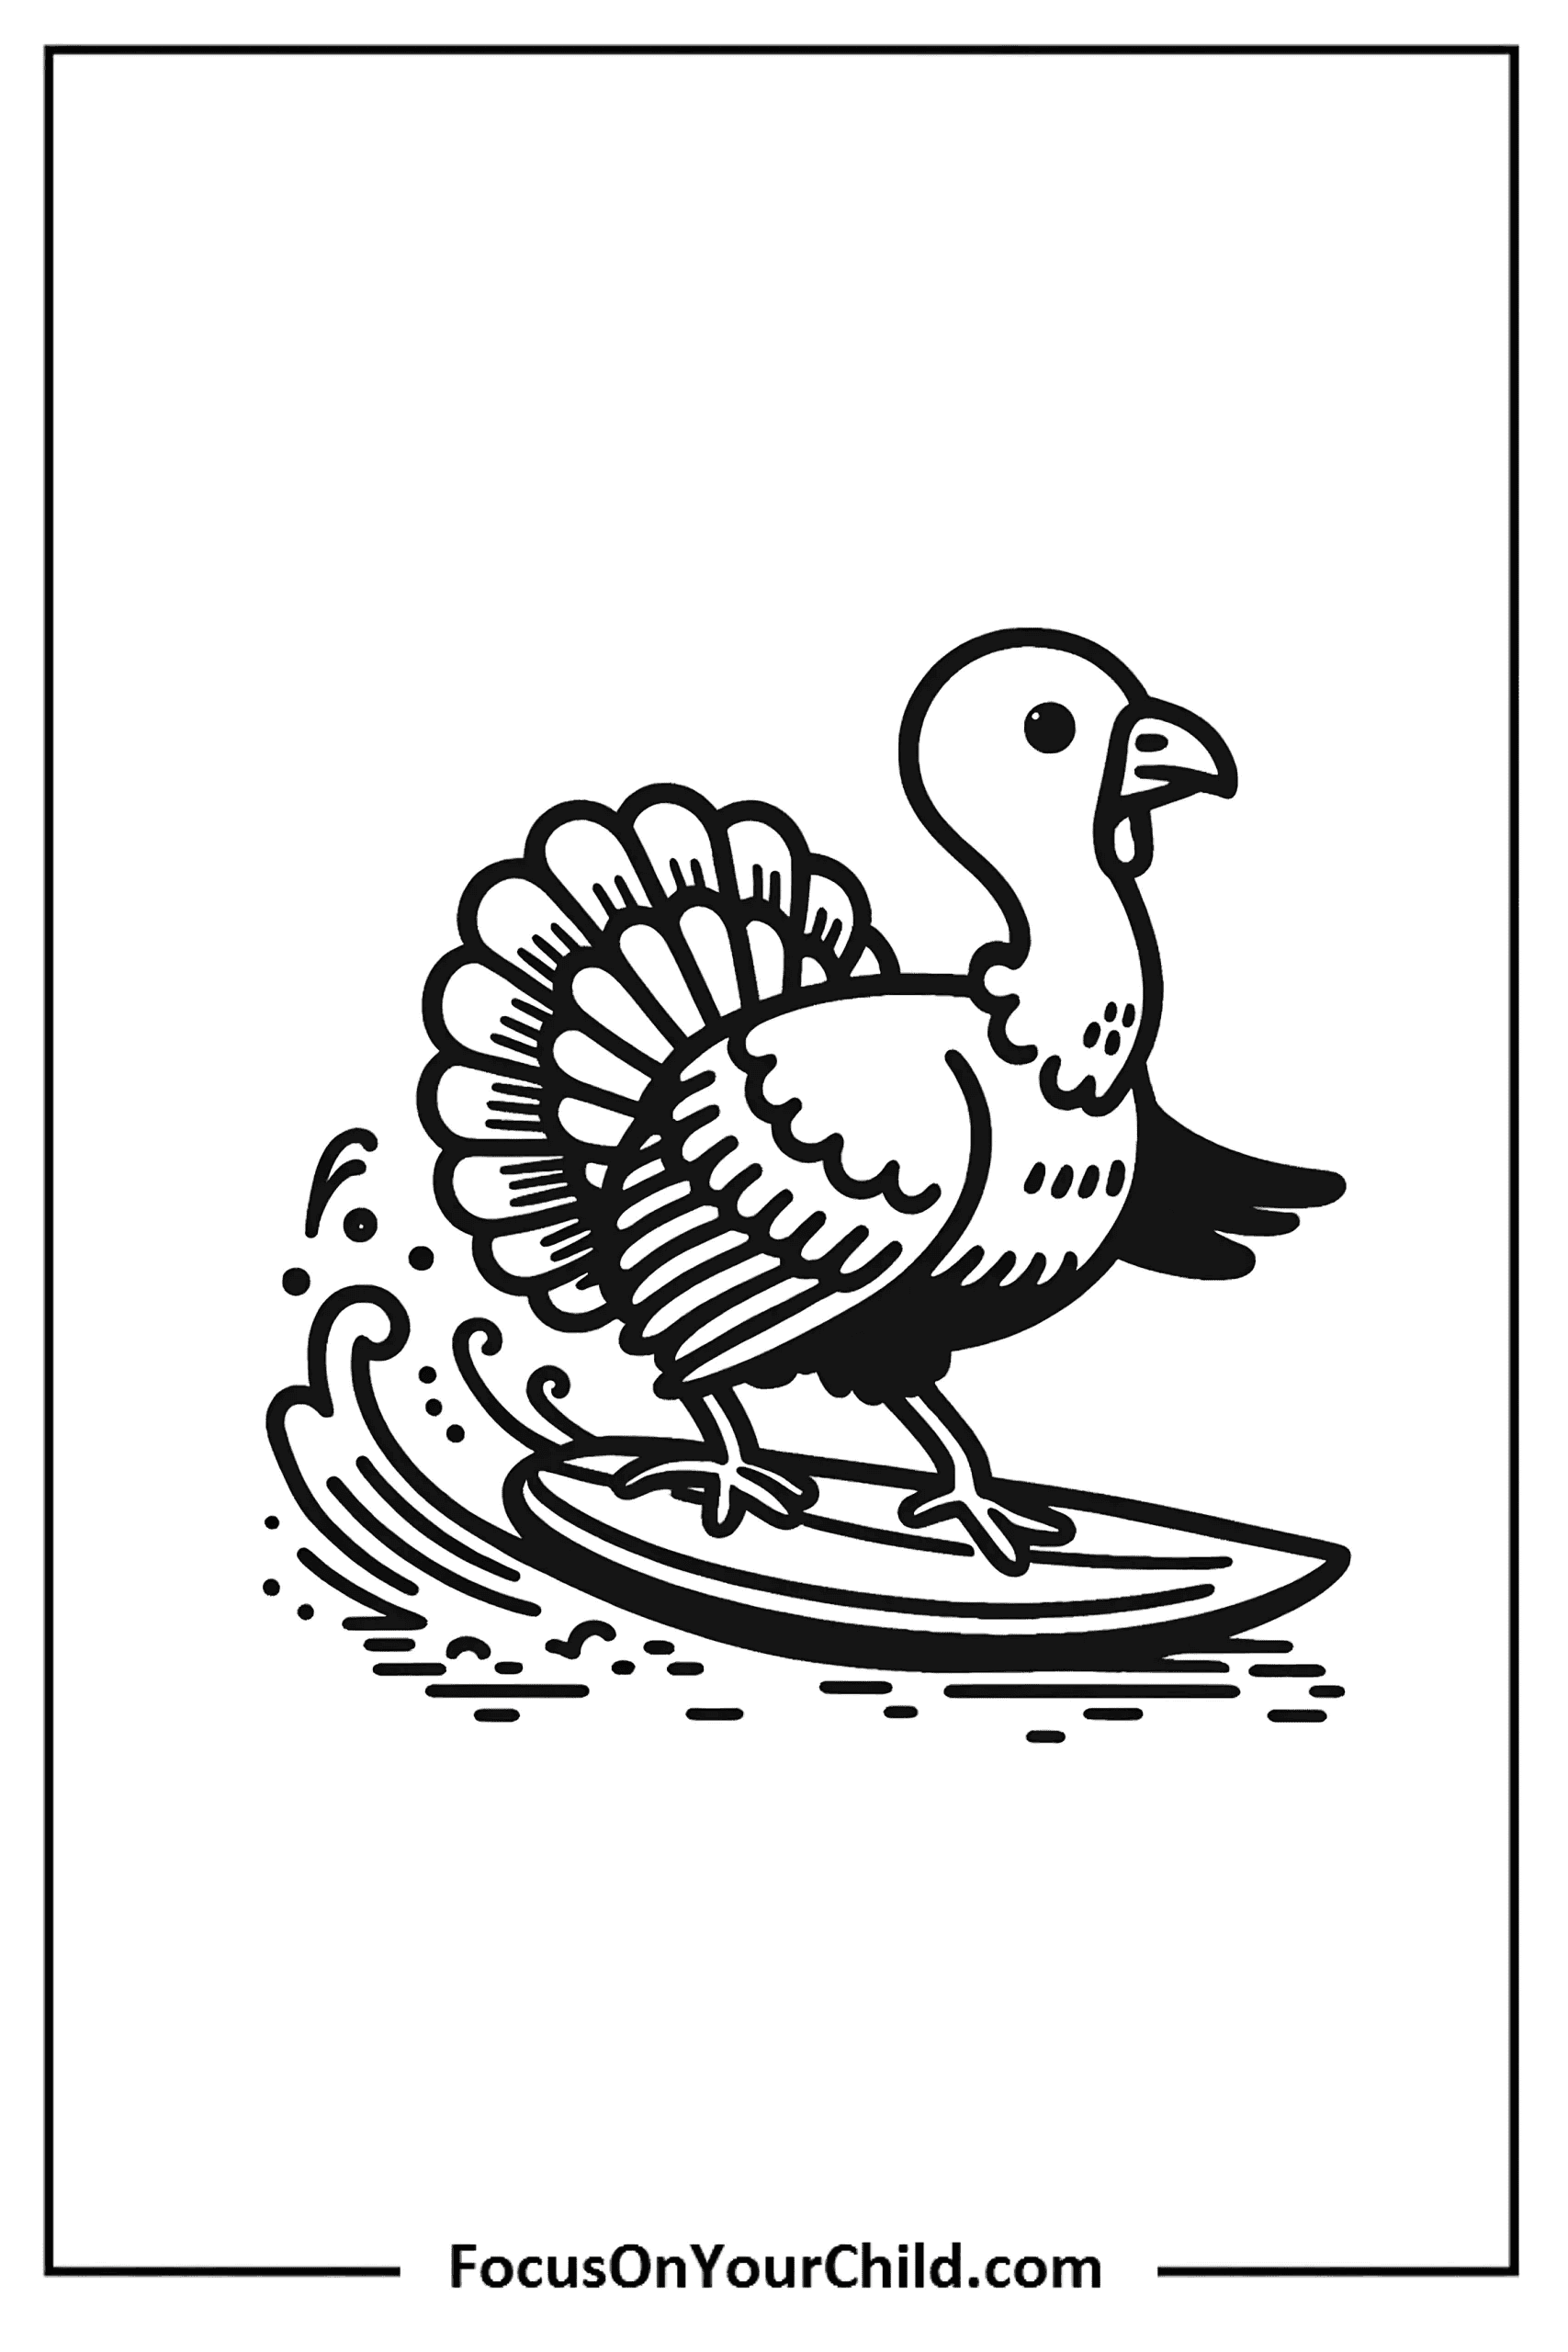 Surfing turkey illustration by FocusOnYourChild.com for childrens entertainment and education.